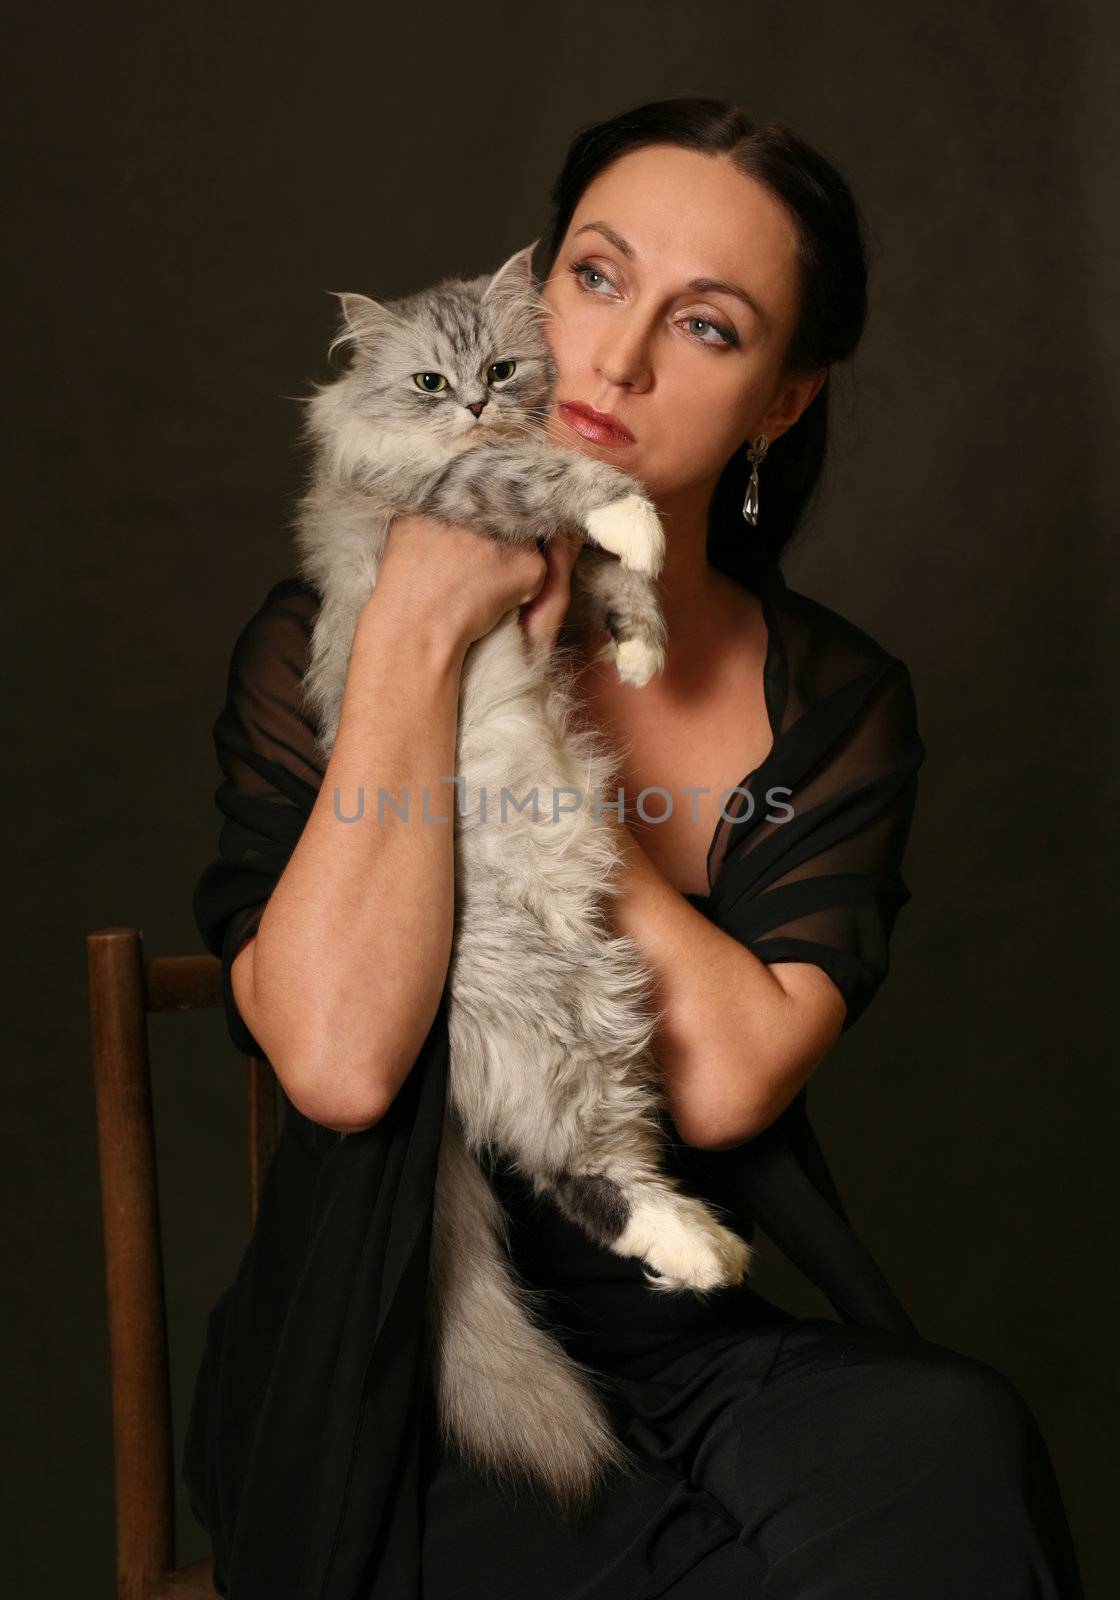 Woman with silver cat by friday